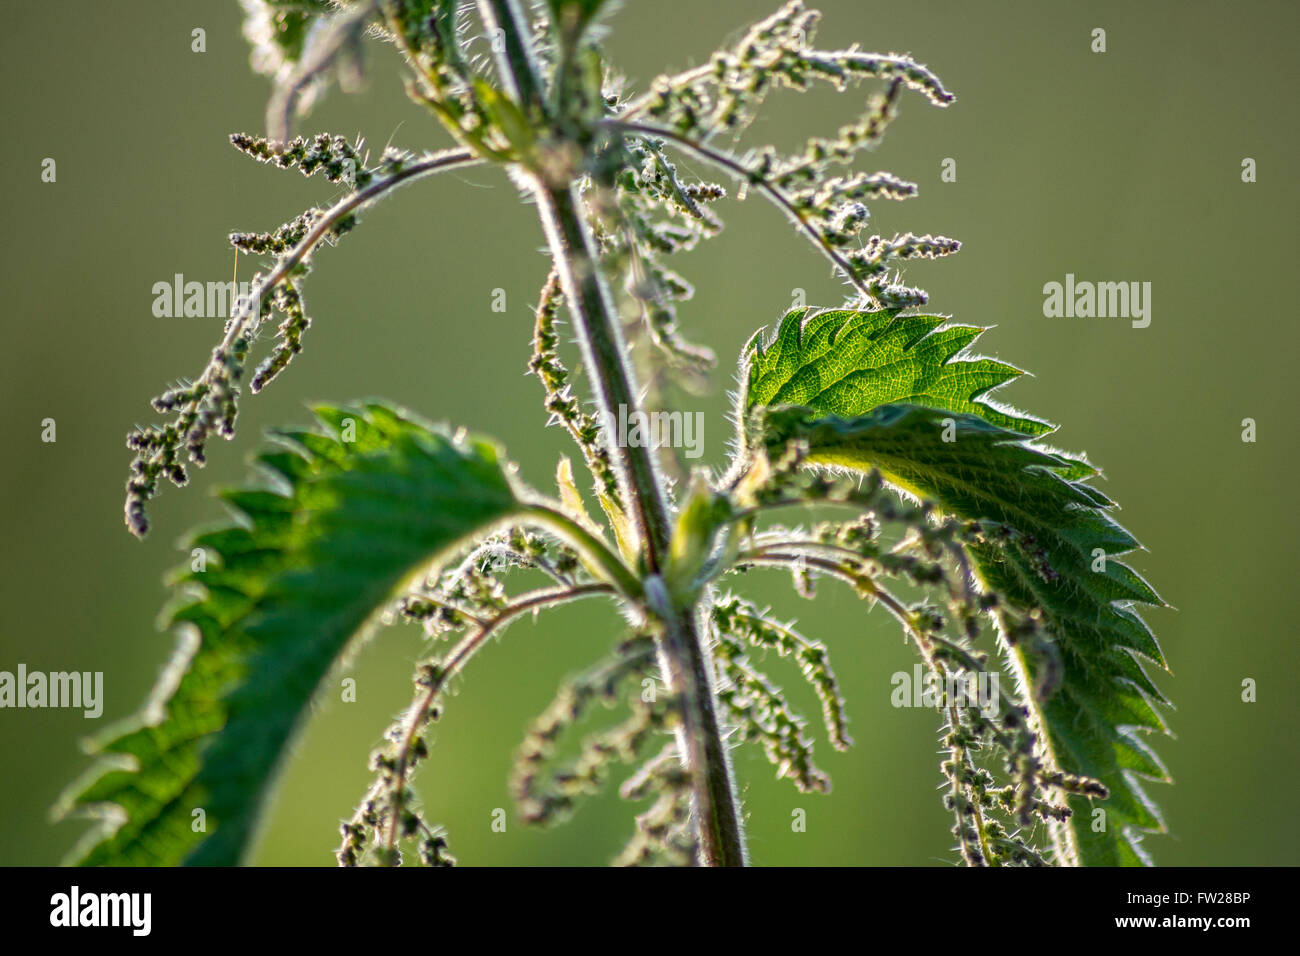 Urtica dioica, stinging nettle Stock Photo